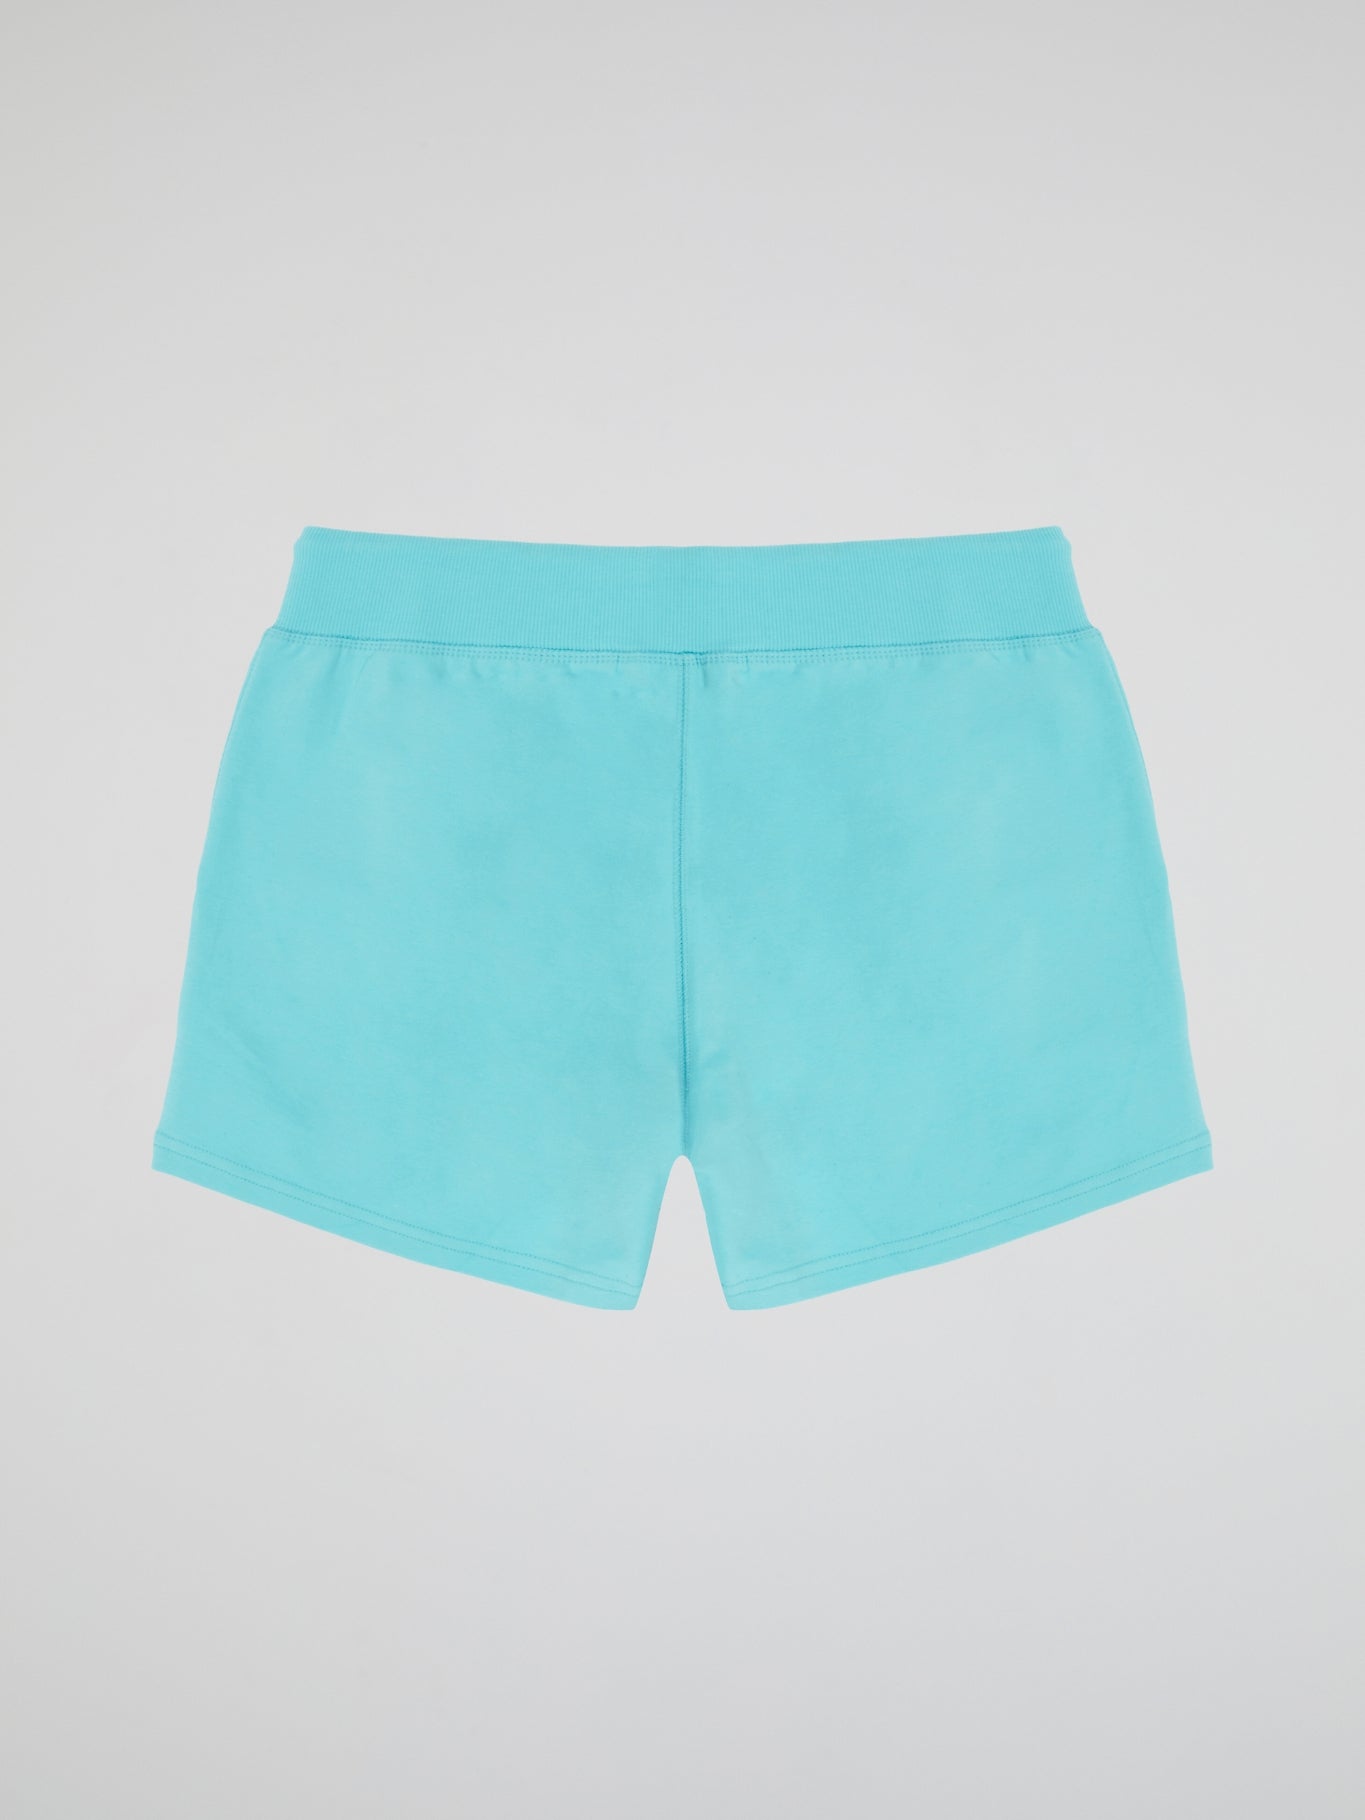 Get ready to rock your summer style with these Blue Drawstring Shorts from Met Injeans. The striking shade of blue will have you standing out from the crowd, while the comfortable drawstring waist ensures the perfect fit every time. Whether you're hitting the beach or lounging by the pool, these shorts are the ultimate must-have for a cool and casual look.